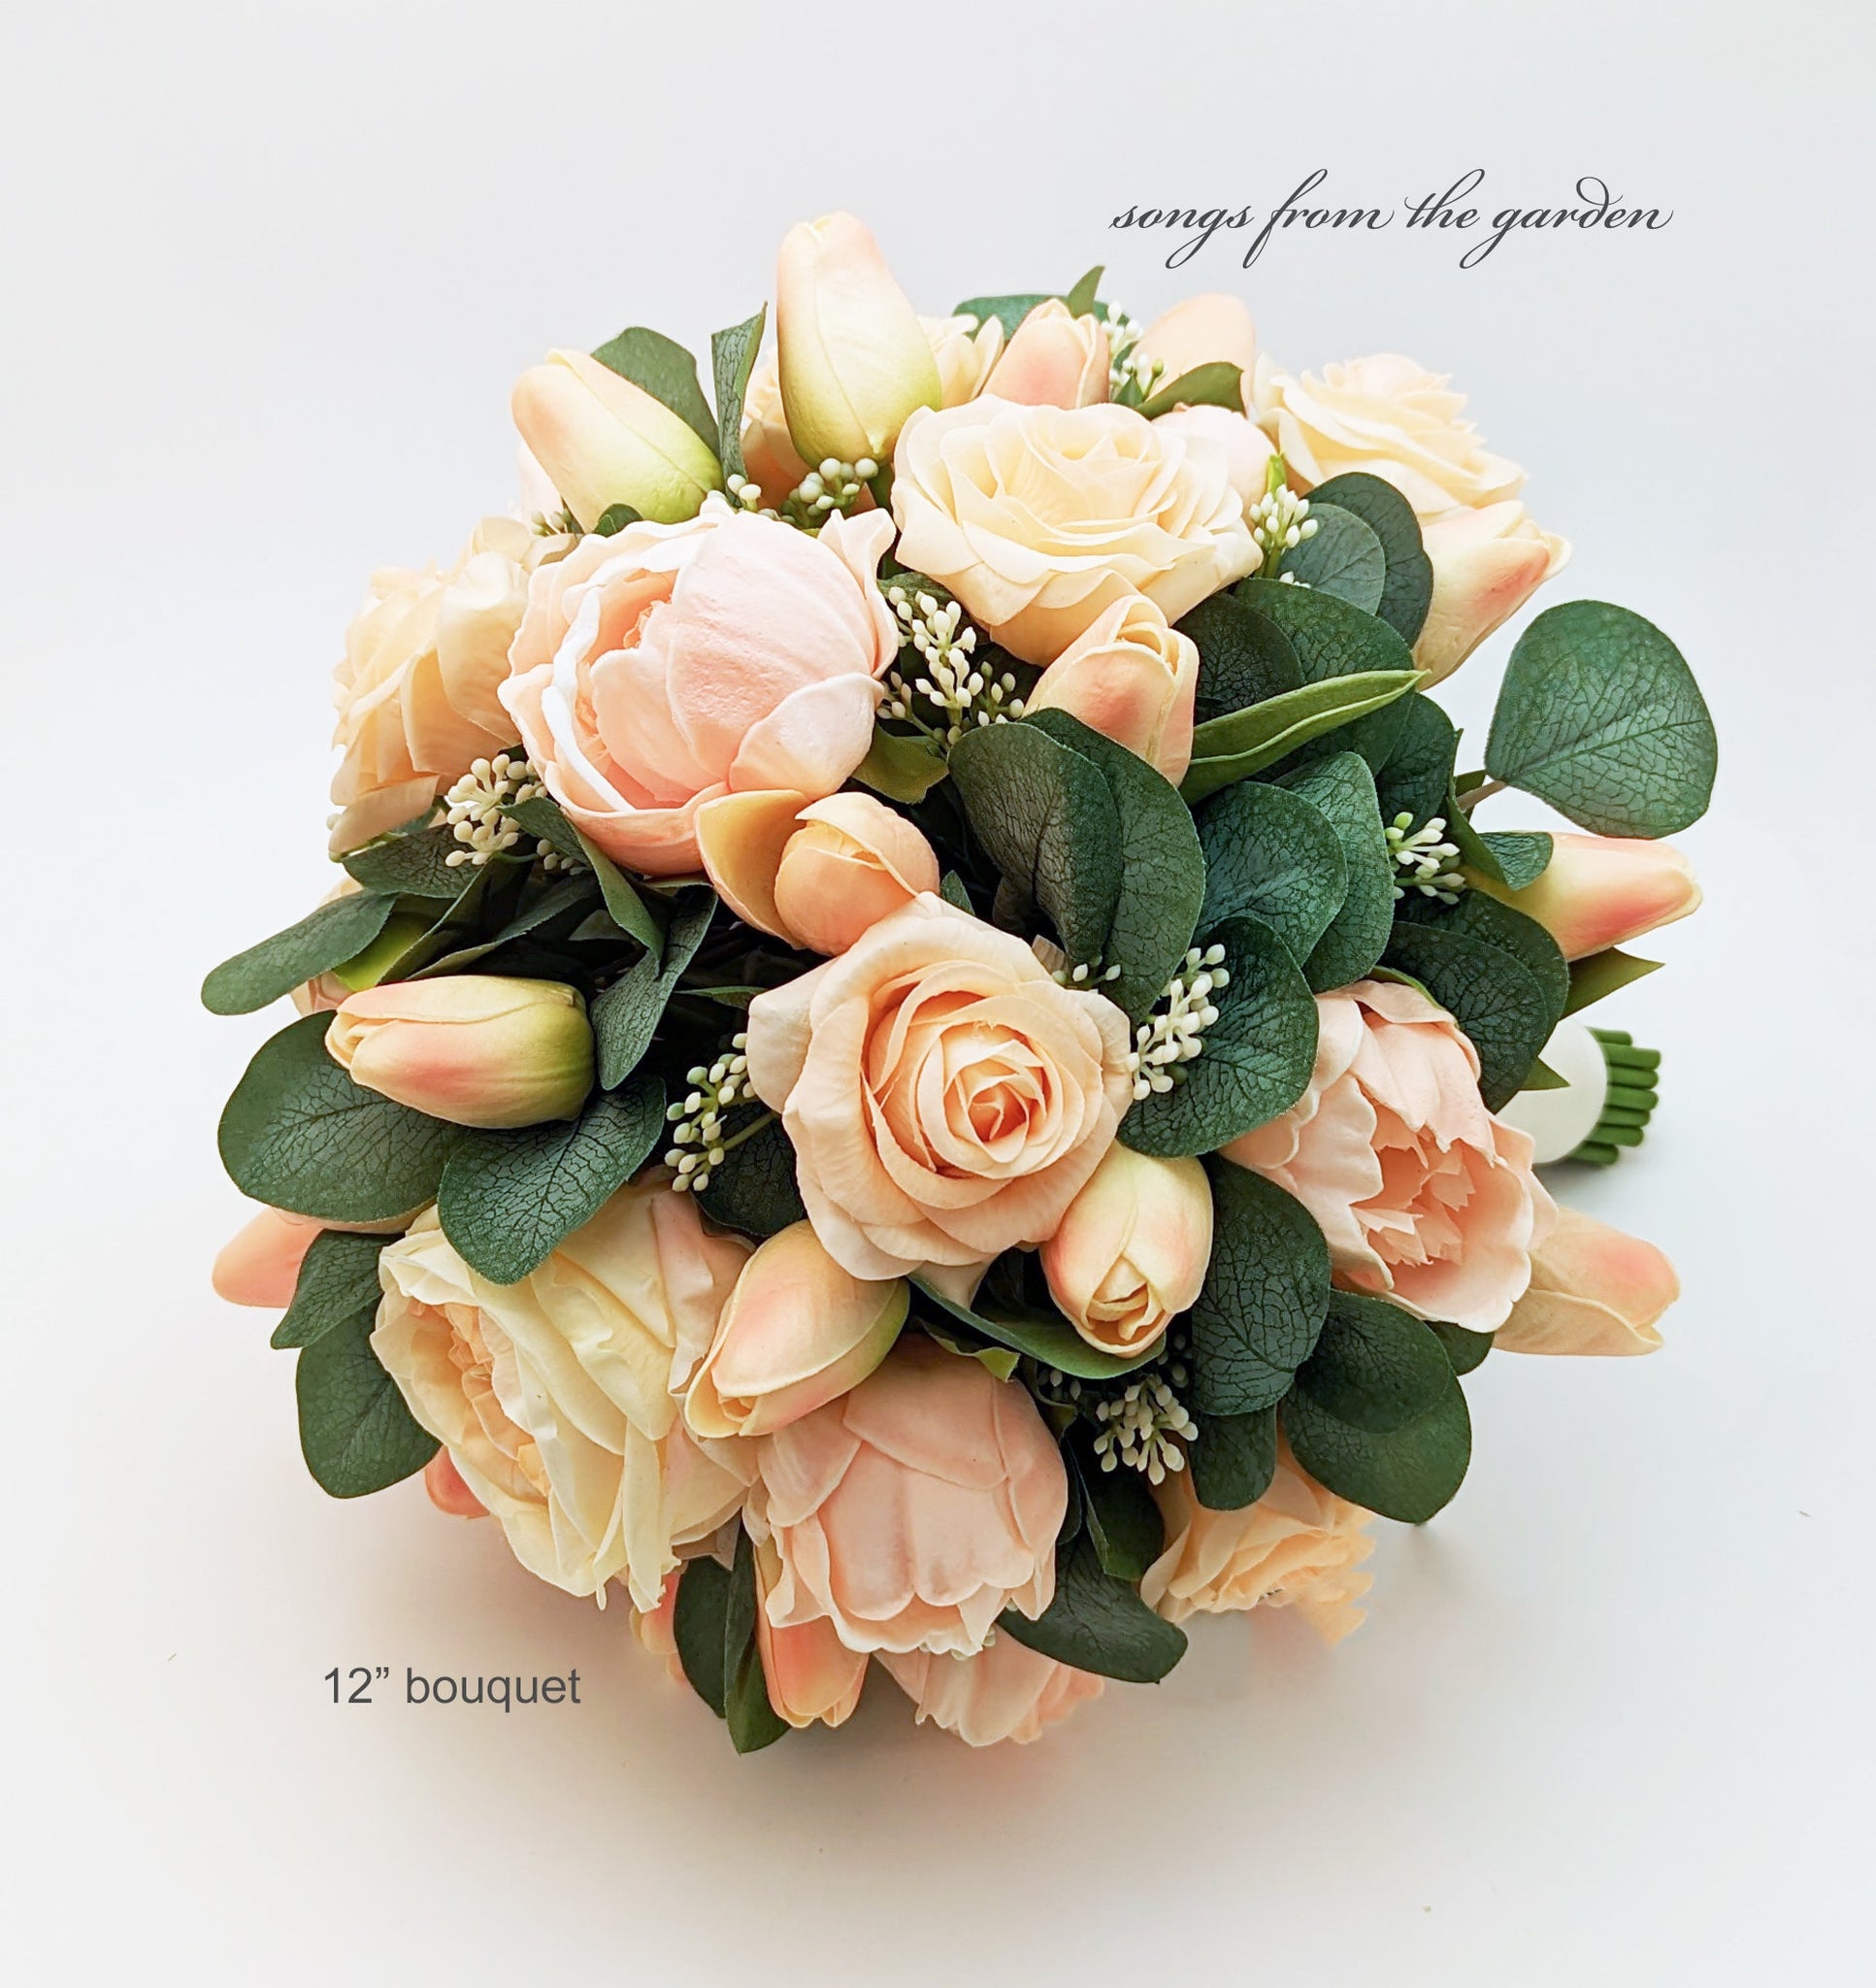 Peach Bridal or Bridesmaid Bouquet Eucalyptus Peonies Roses Tulips - Add Groom's Boutonniere Corsage Wedding Centerpiece Crown & More!